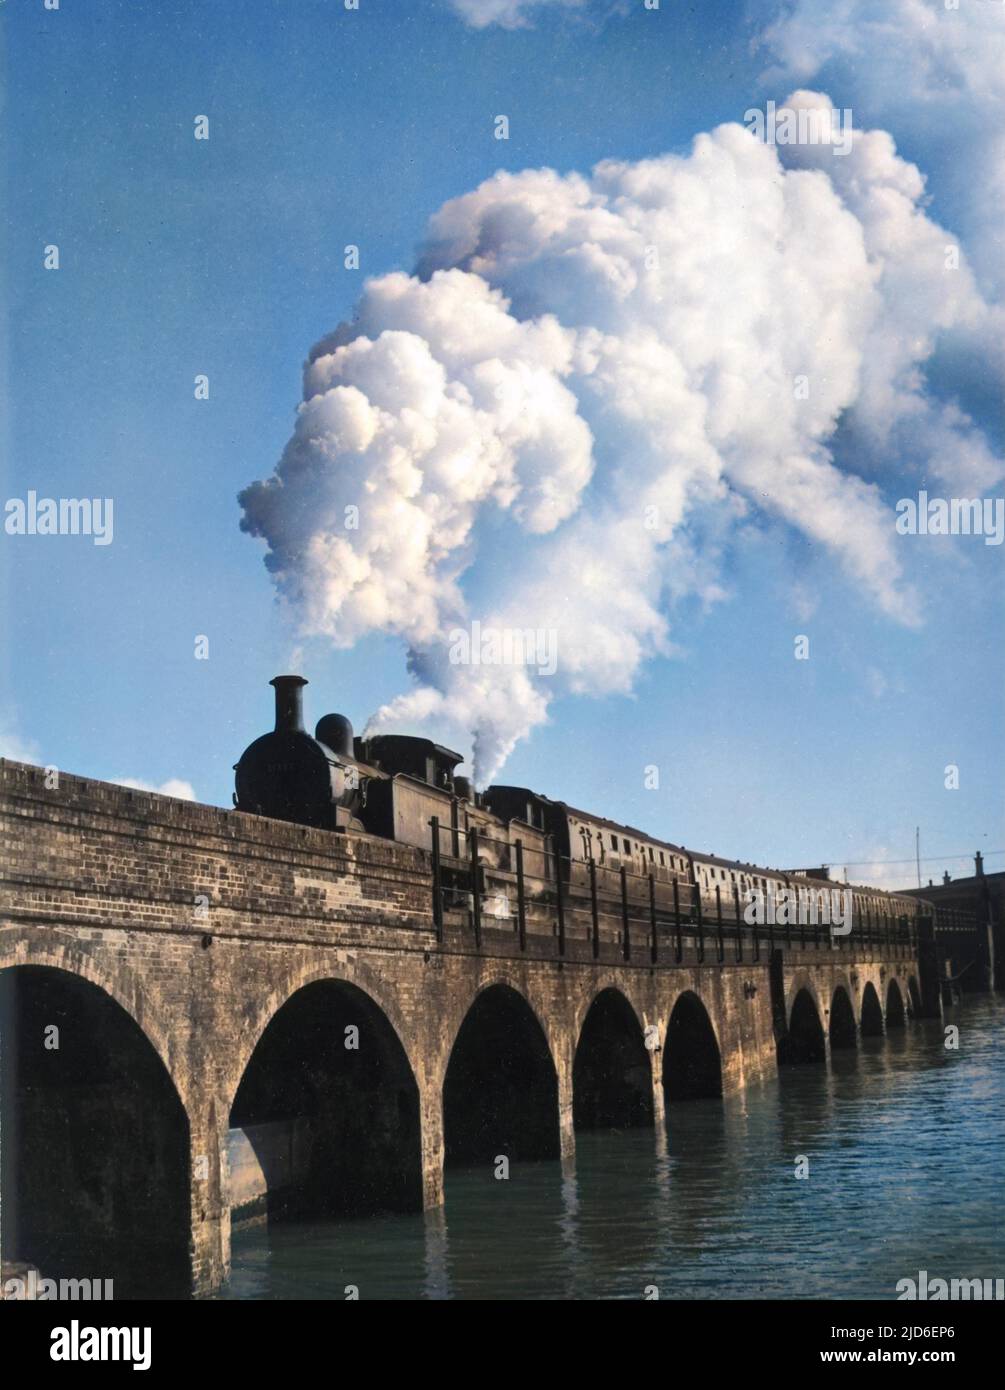 The Continental Boat Express Boat Express train on the viaduct at Folkestone, Kent, England, en route to Calais and Boulogne, France. Colourised version of : 10160726       Date: 1950s Stock Photo